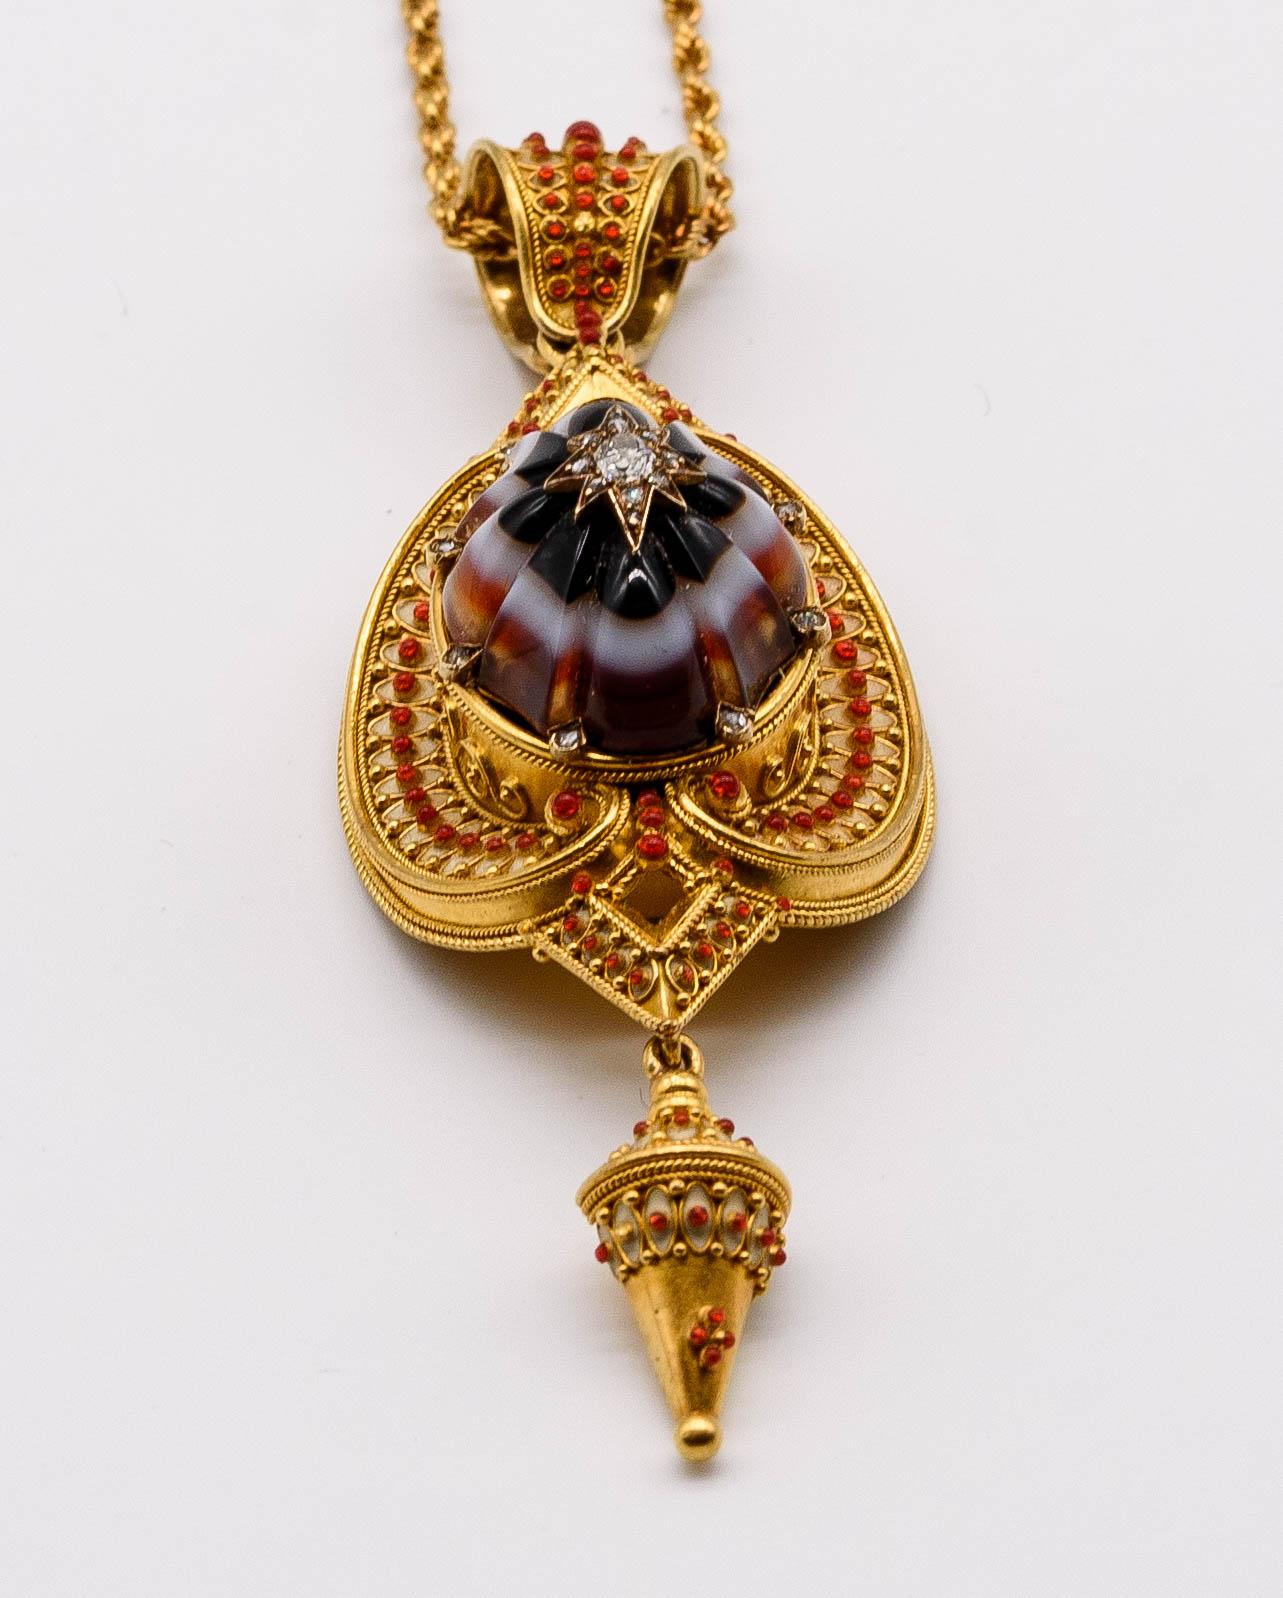 This delightfully complex pendant holds a plethora of noteworthy details.  Crafted in 18 karat yellow gold, it boasts a melon cut banded agate center with sharply polished edges, the dome leading up to a discreet diamond set star.   The motif is